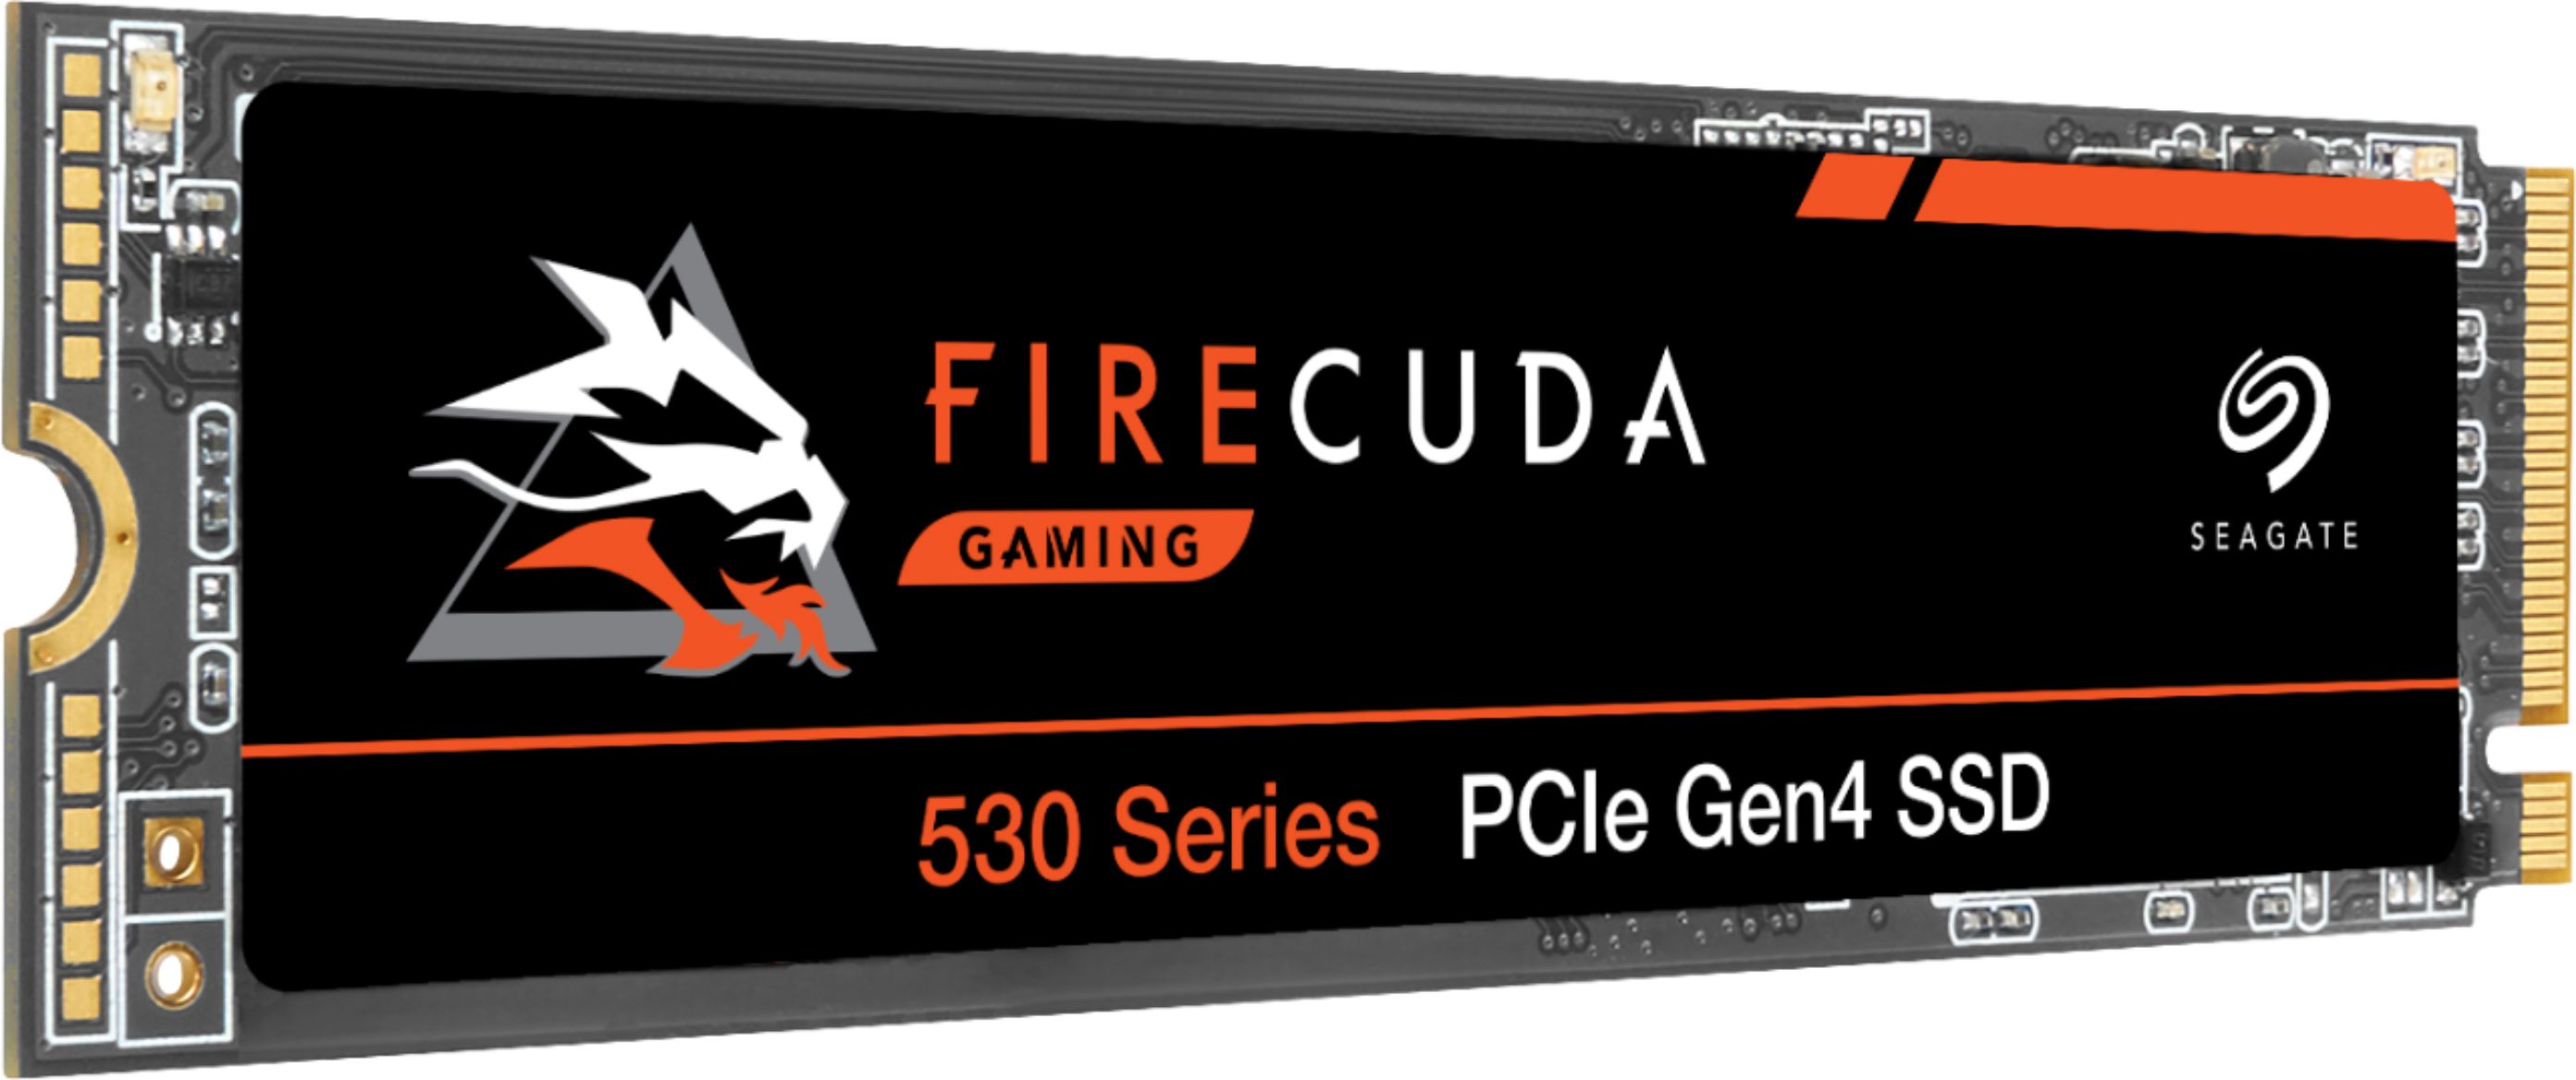 FireCuda 530 2TB SSD for PS5